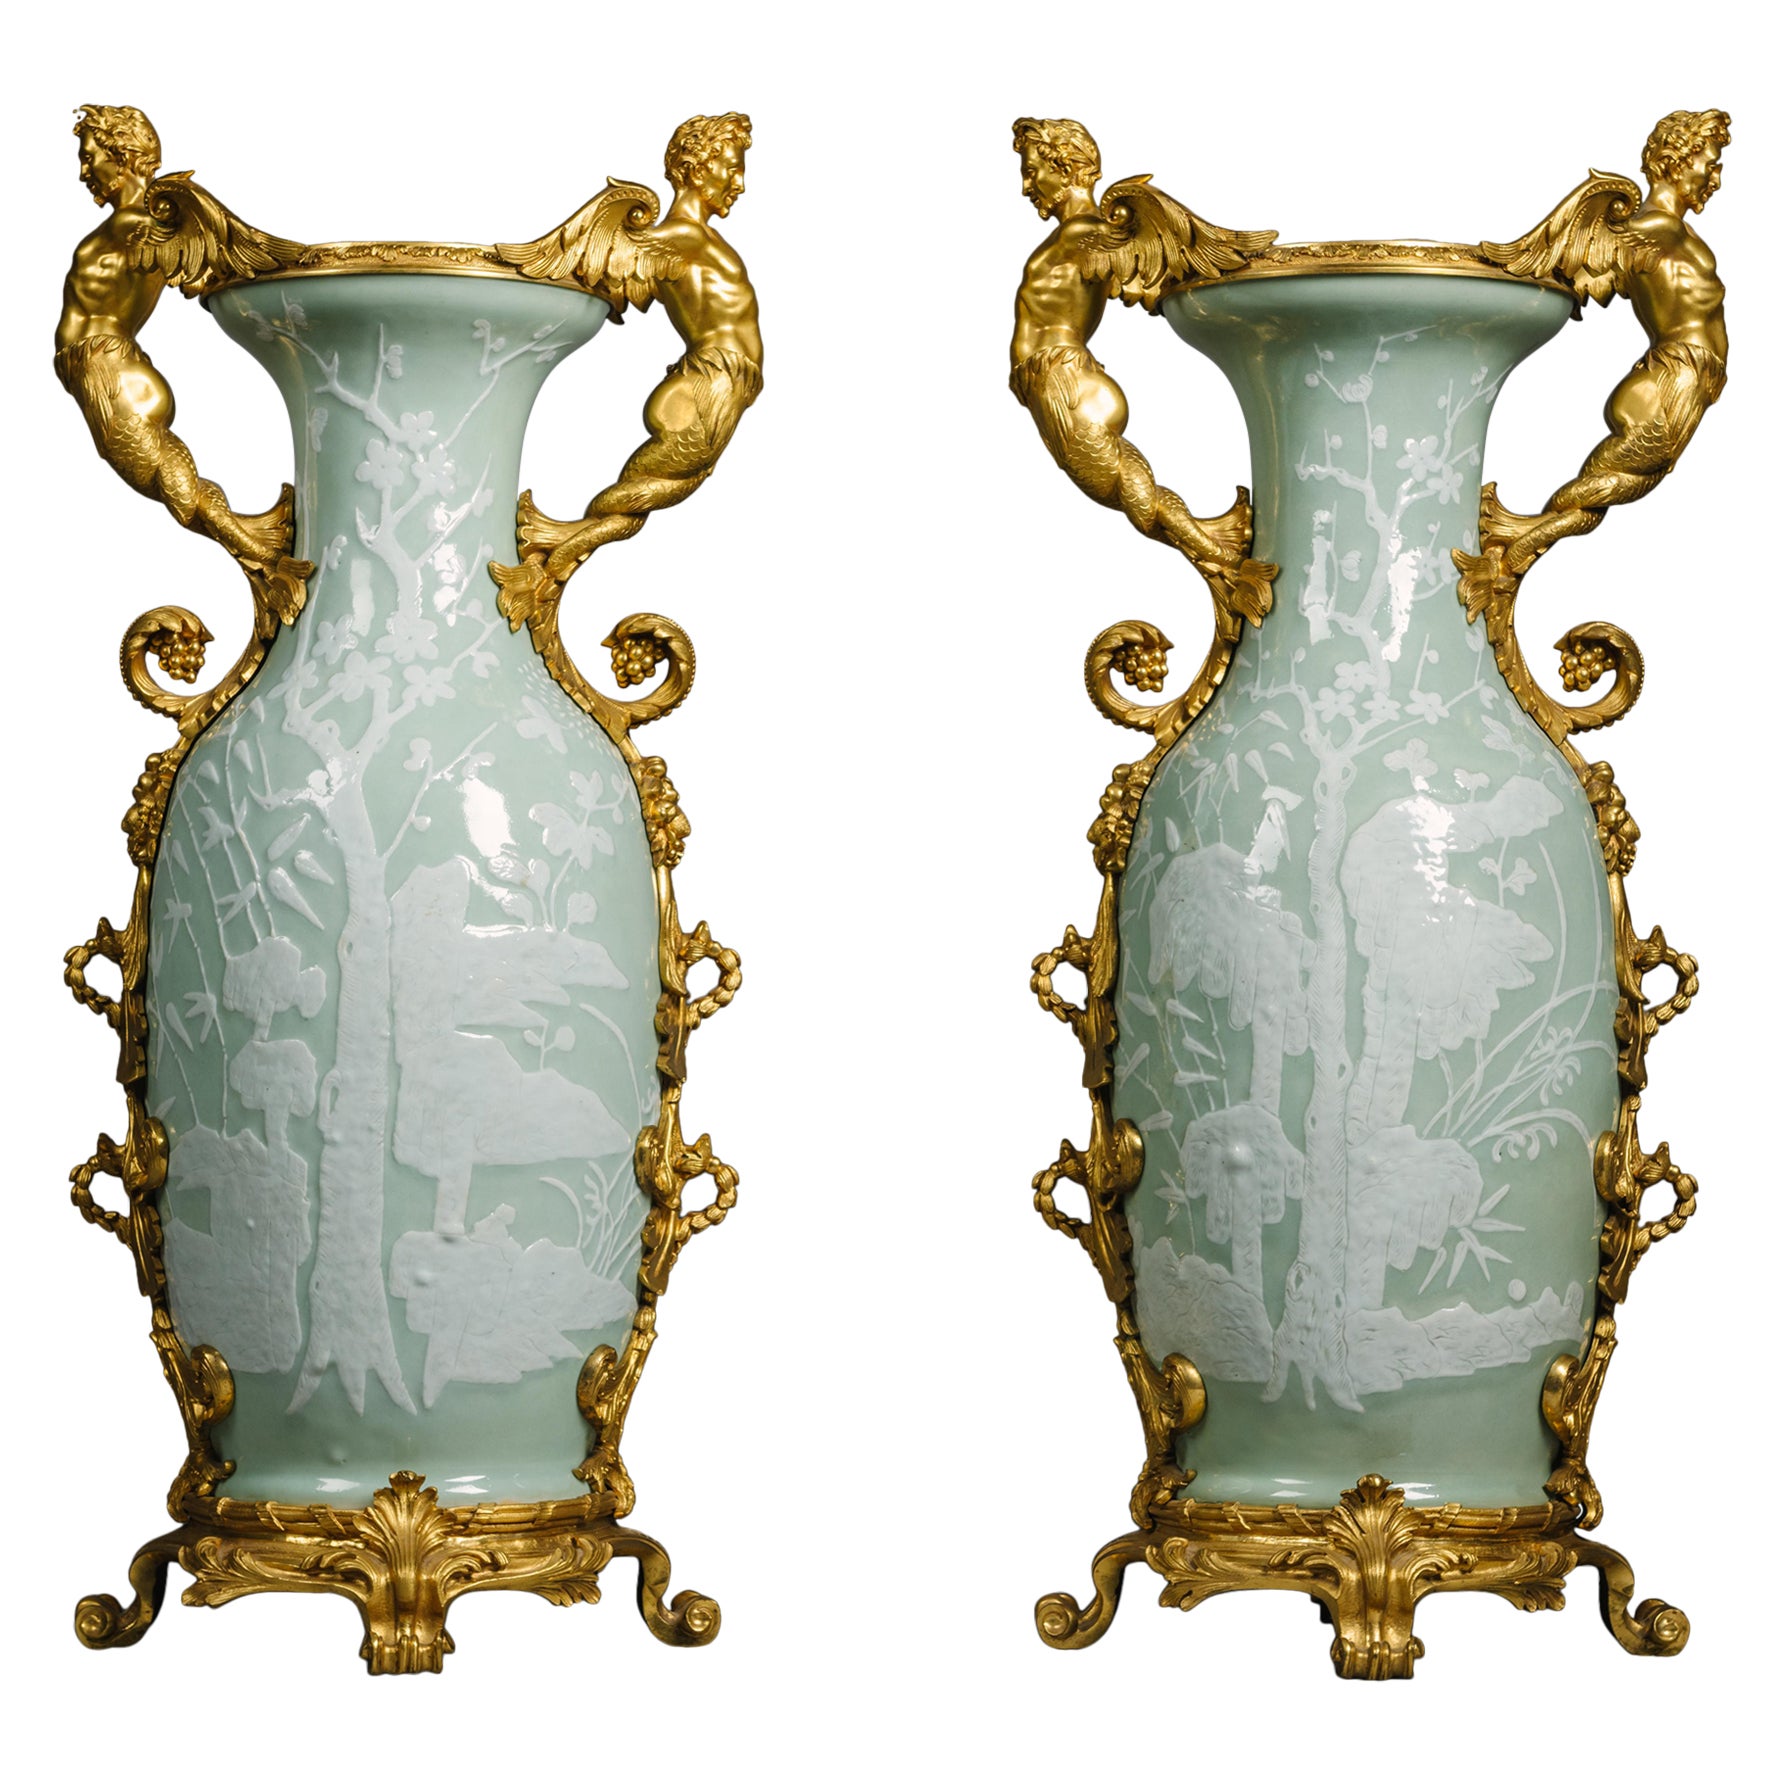 Pair of Gilt-Bronze Mounted Chinese Celadon-Ground Porcelain Vases For Sale